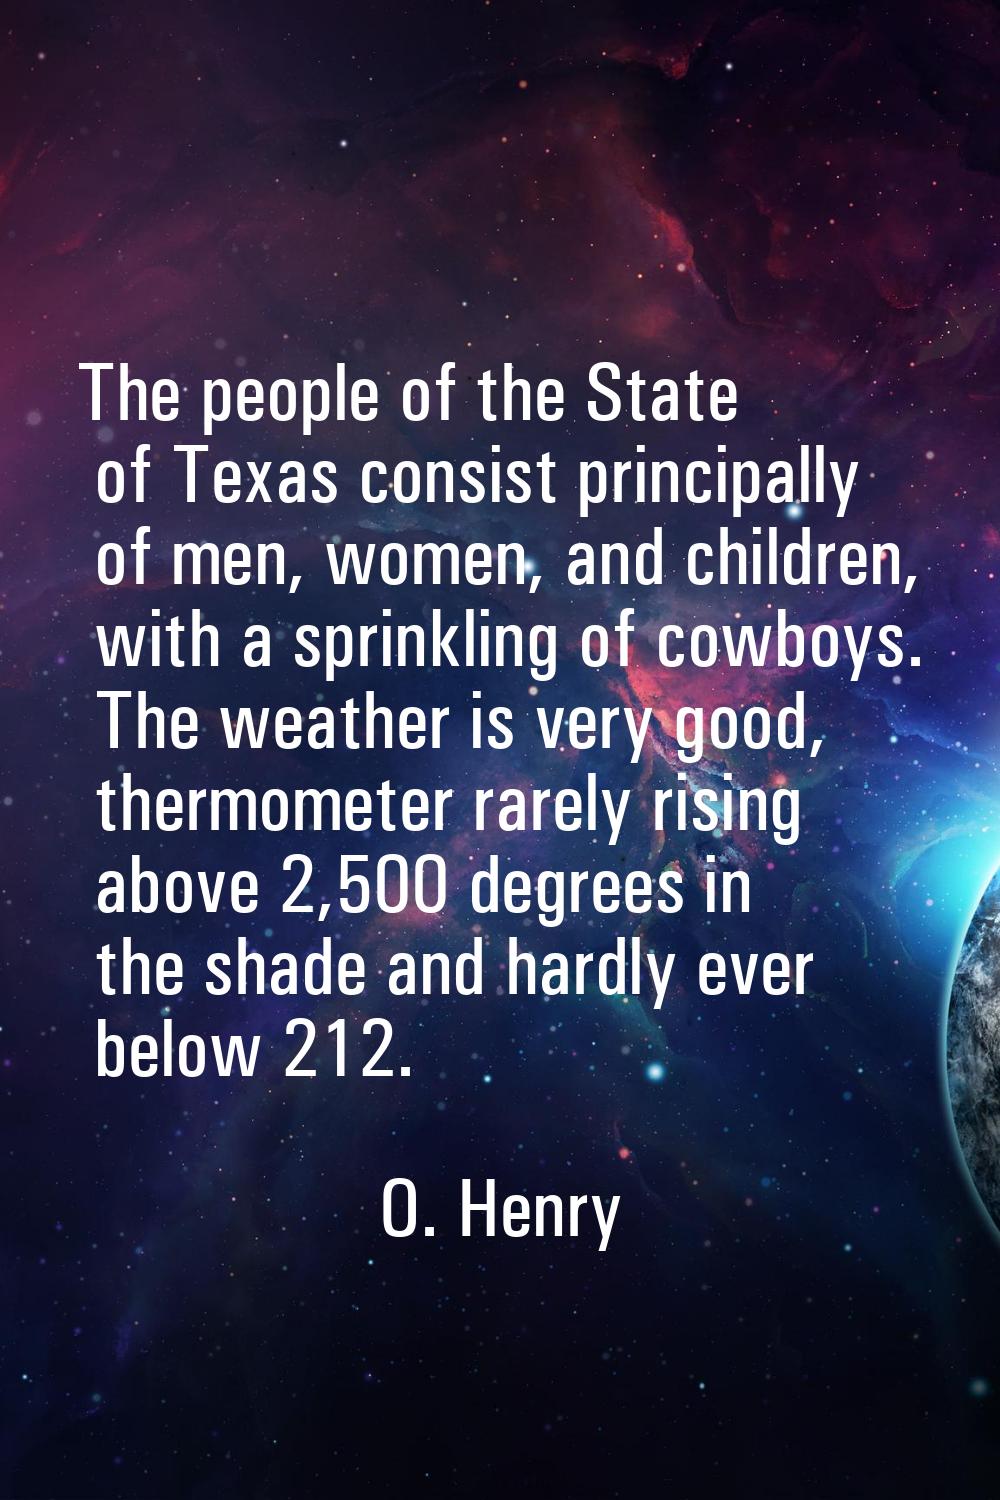 The people of the State of Texas consist principally of men, women, and children, with a sprinkling